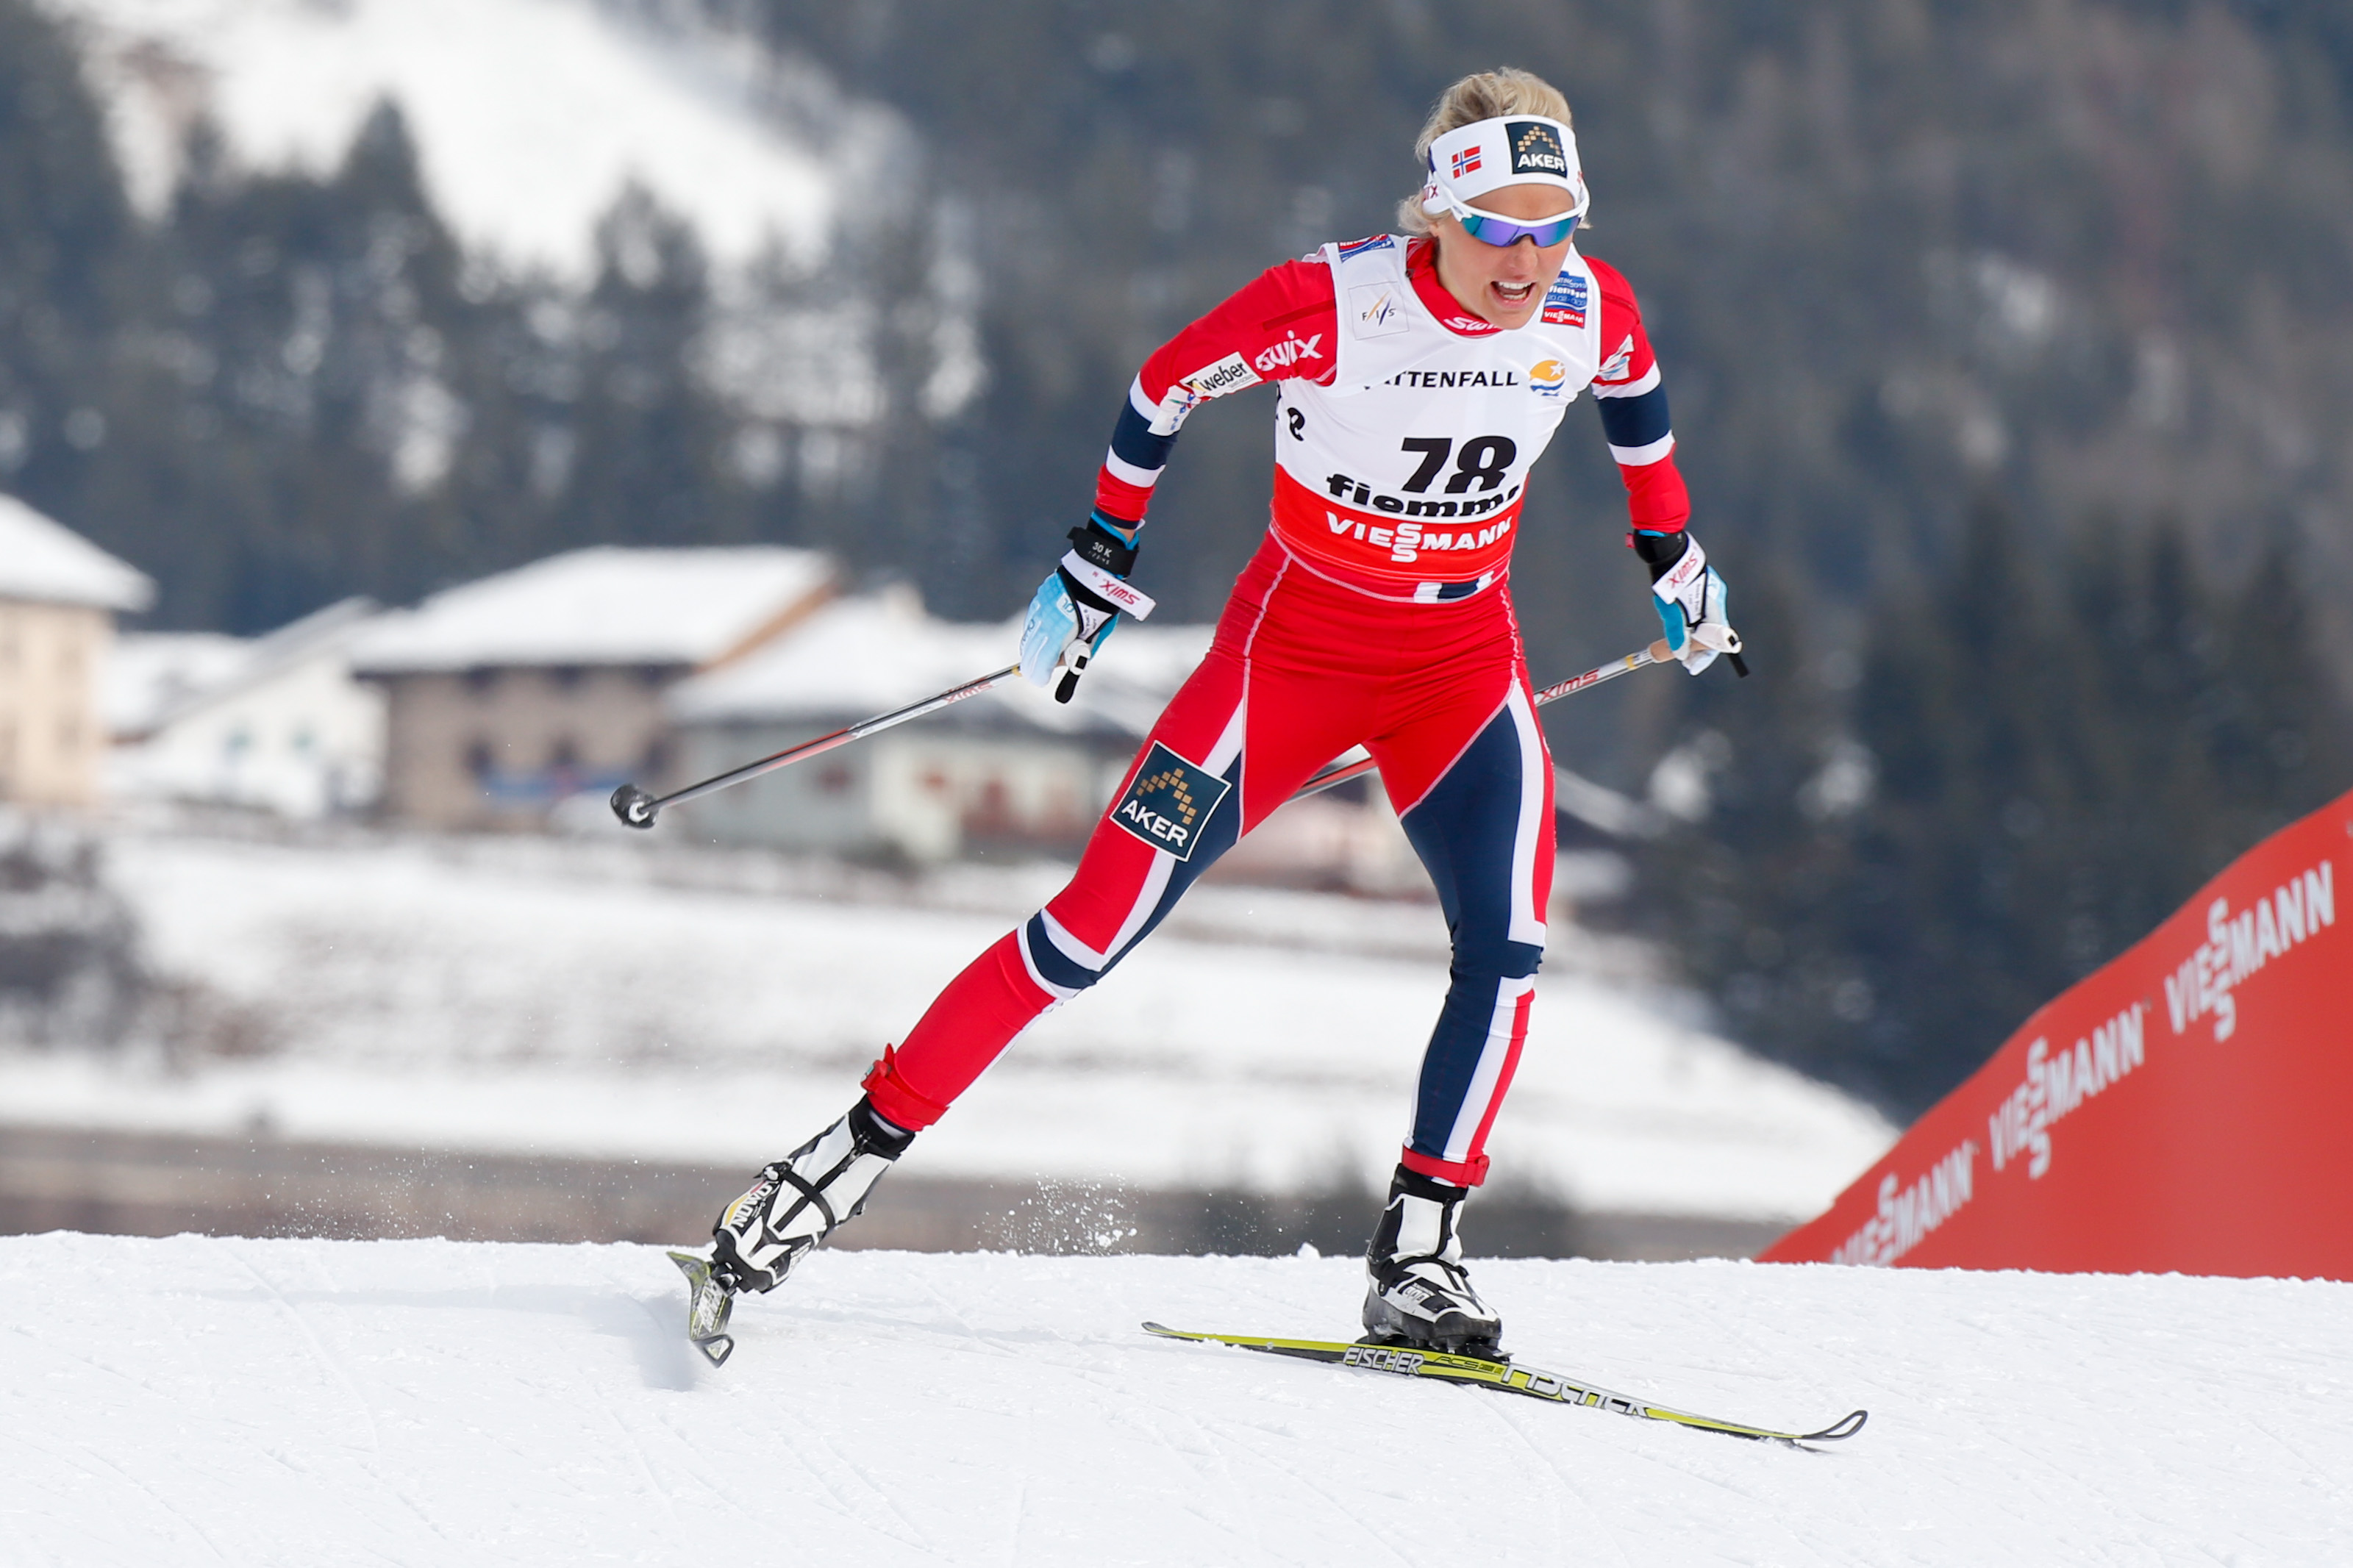 Therese Johaug on her way to capturing gold in the 10 k freestyle individual start at 2013 World Championships in Val di Fiemme, Italy. The Norwegian beat teammate Marit Bjørgen by 10.2 seconds for the win. (Photo: Fiemme2013)